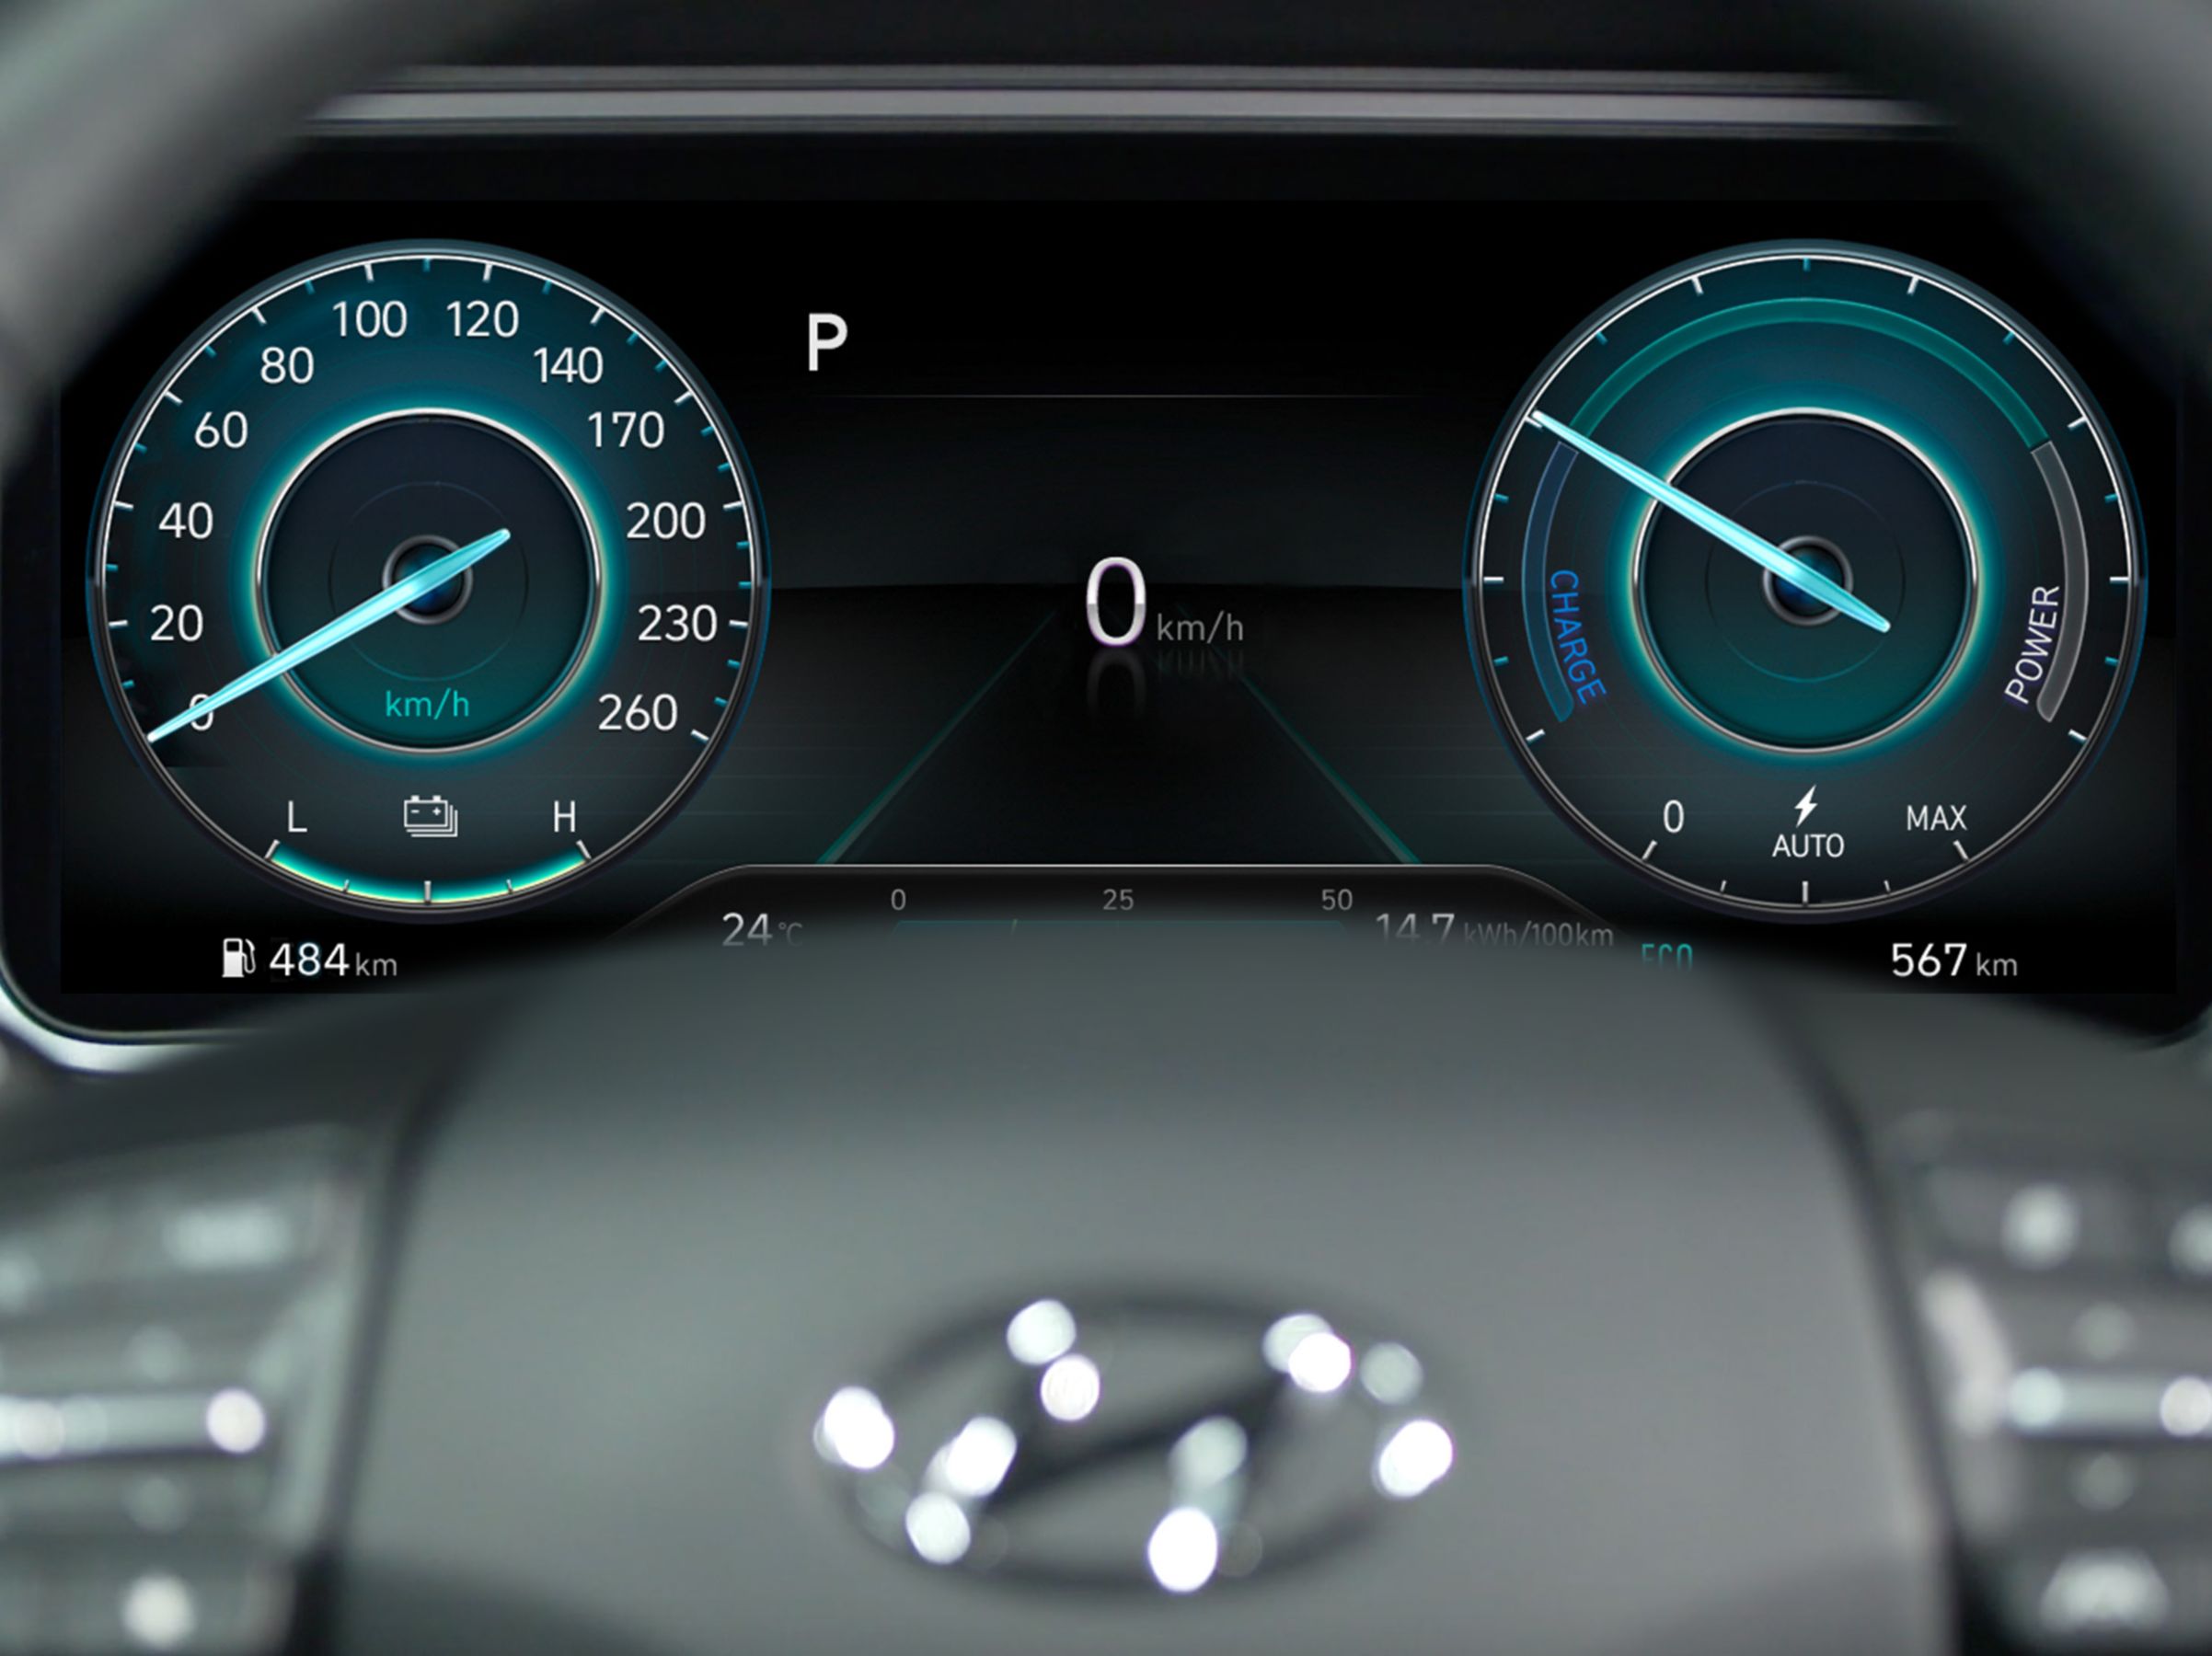 The 10.25" navigation system screen of the new Hyundai Kona Electric.